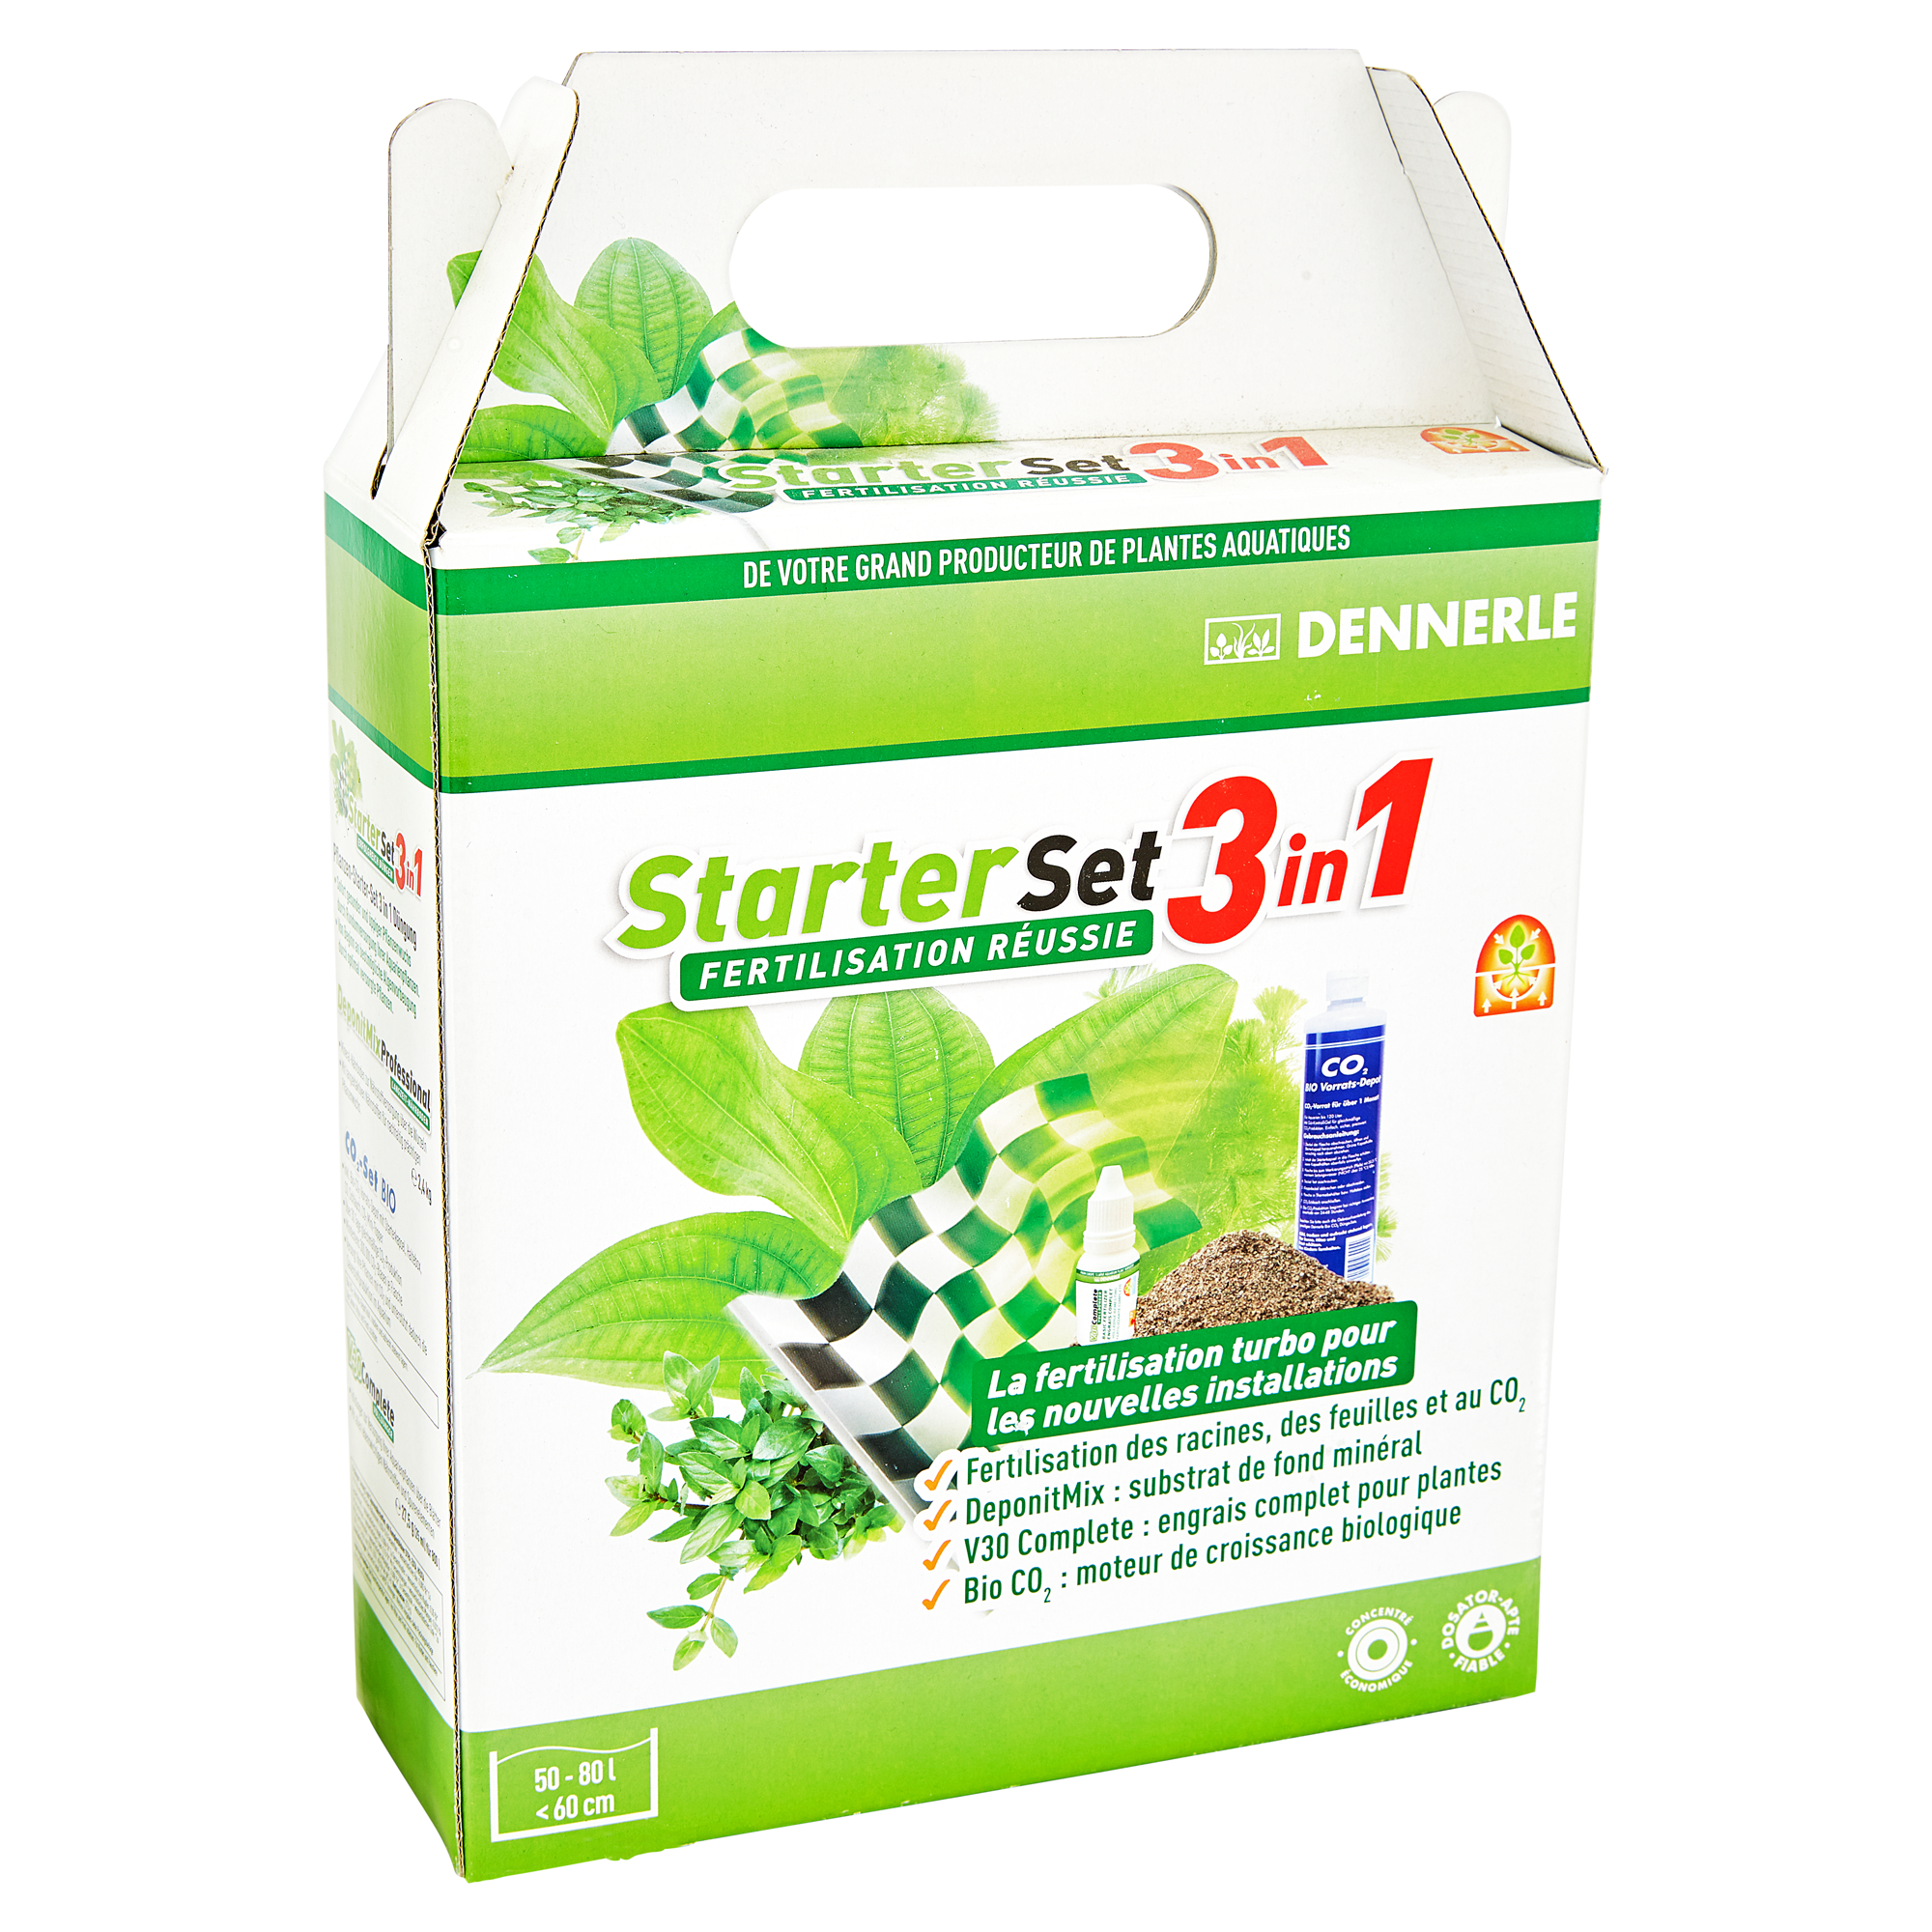 Pflanzendünger "Starter Set 3in1" + product picture